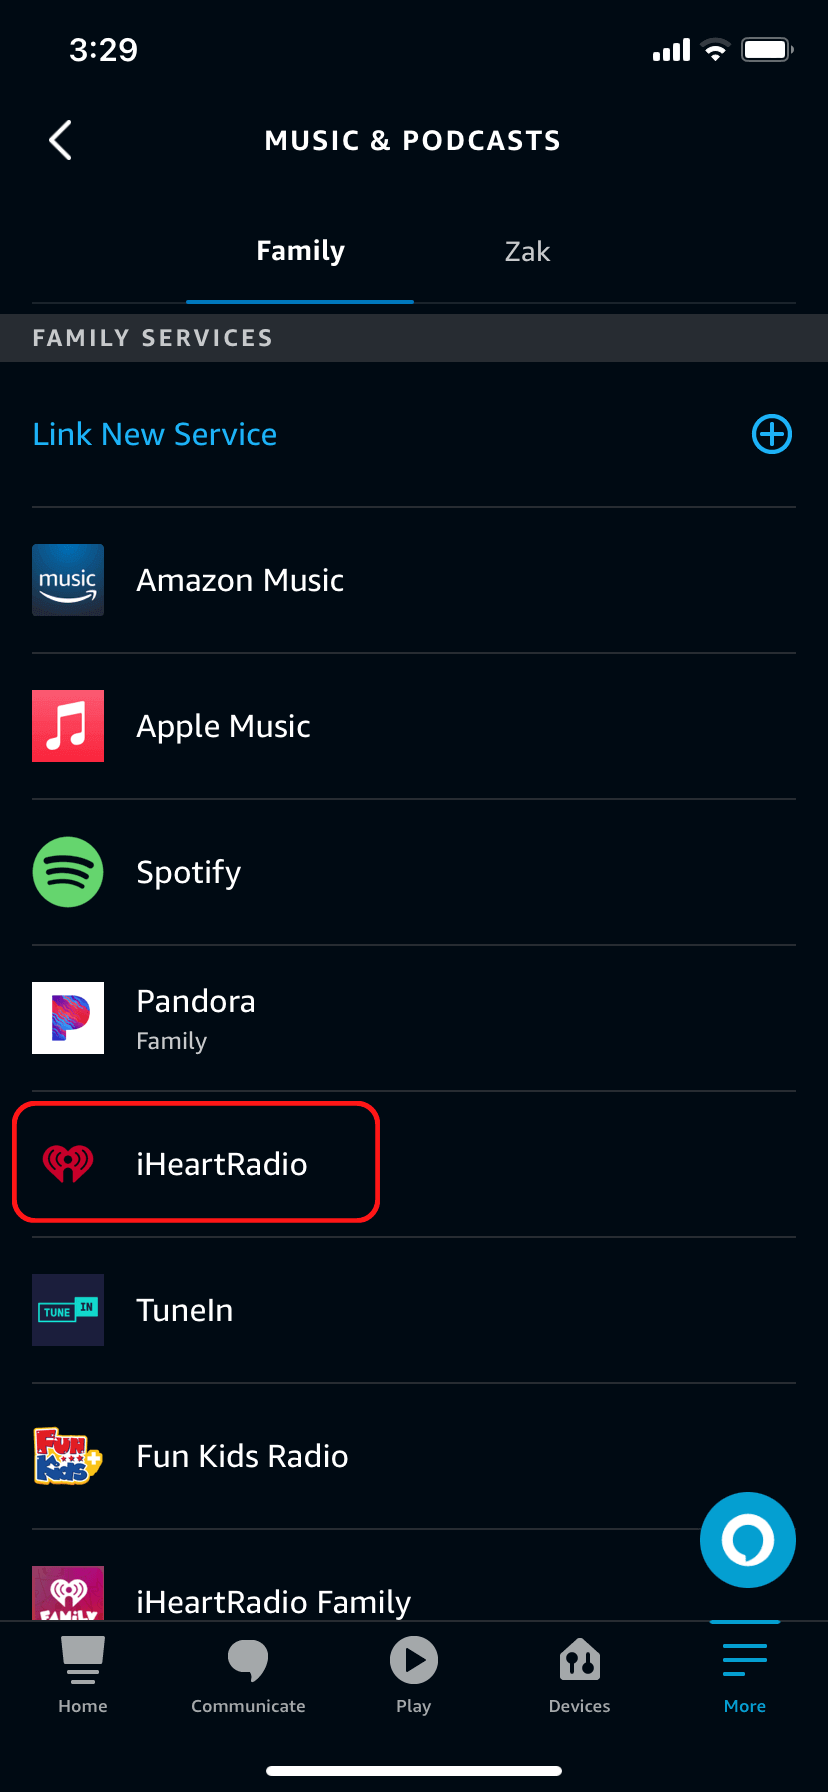 Selecting iHeartRadio from the Music & Podcasts menu in the Alexa app